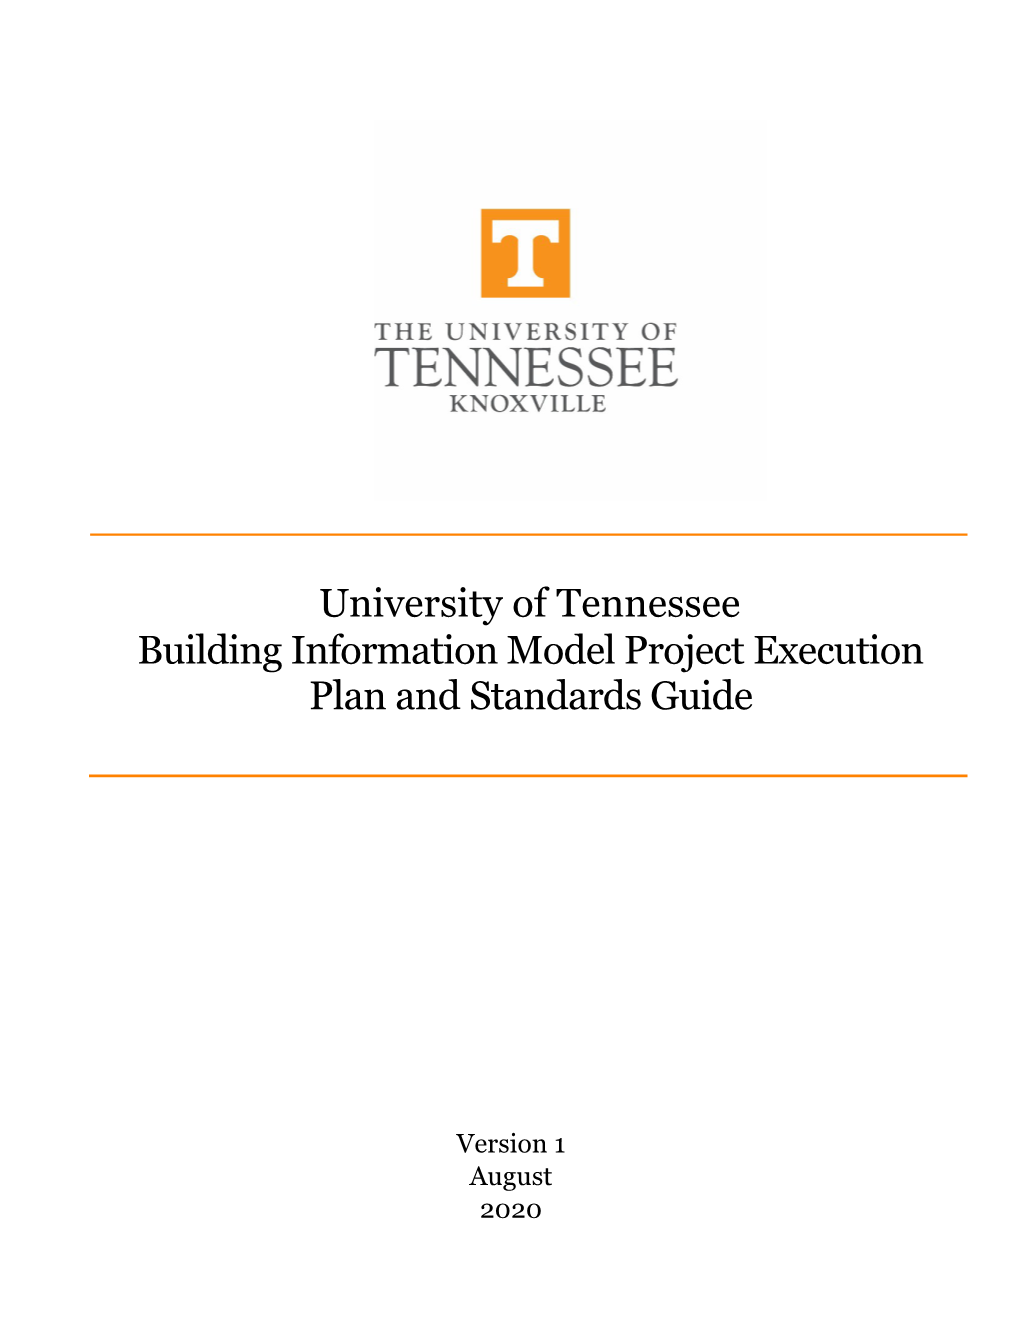 University of Tennessee Building Information Model Project Execution Plan and Standards Guide